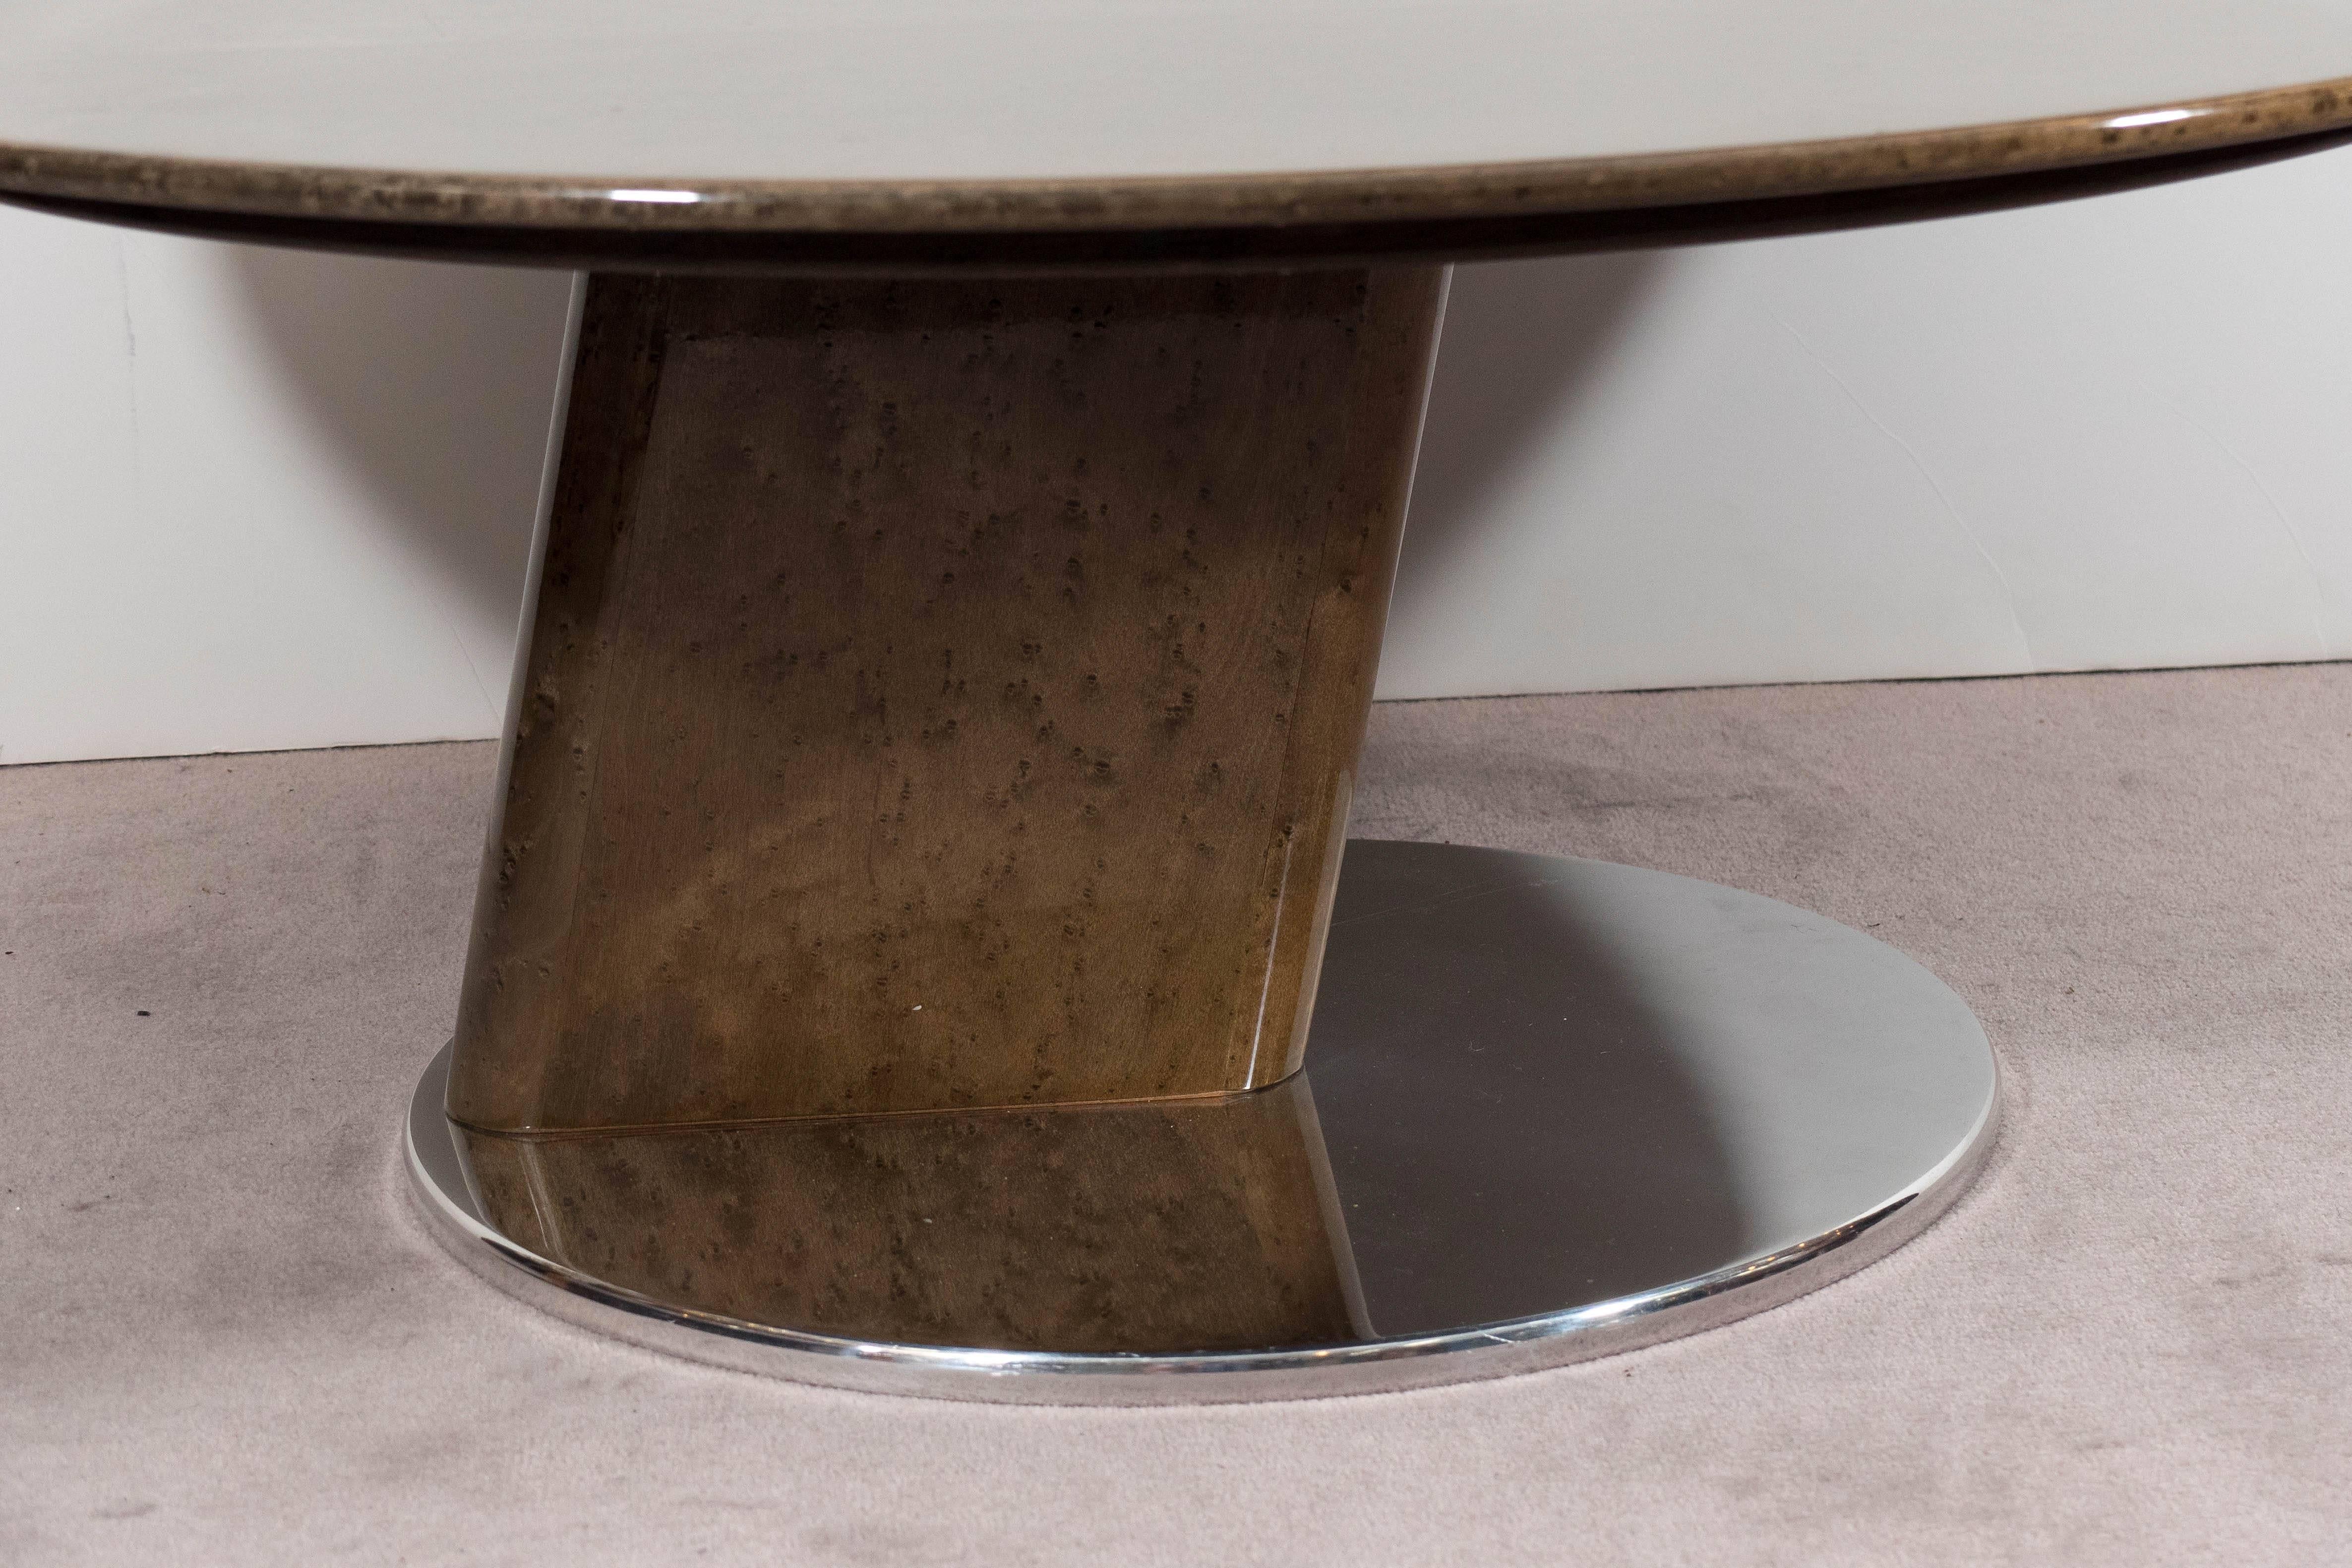 A round, birds-eye maple coffee table by Saporiti, lacquered to a gleaming finish, above a smaller circular polished steel base. The base features a unique triangular shape joining the two circles. Good condition, consistent with age and use, with a